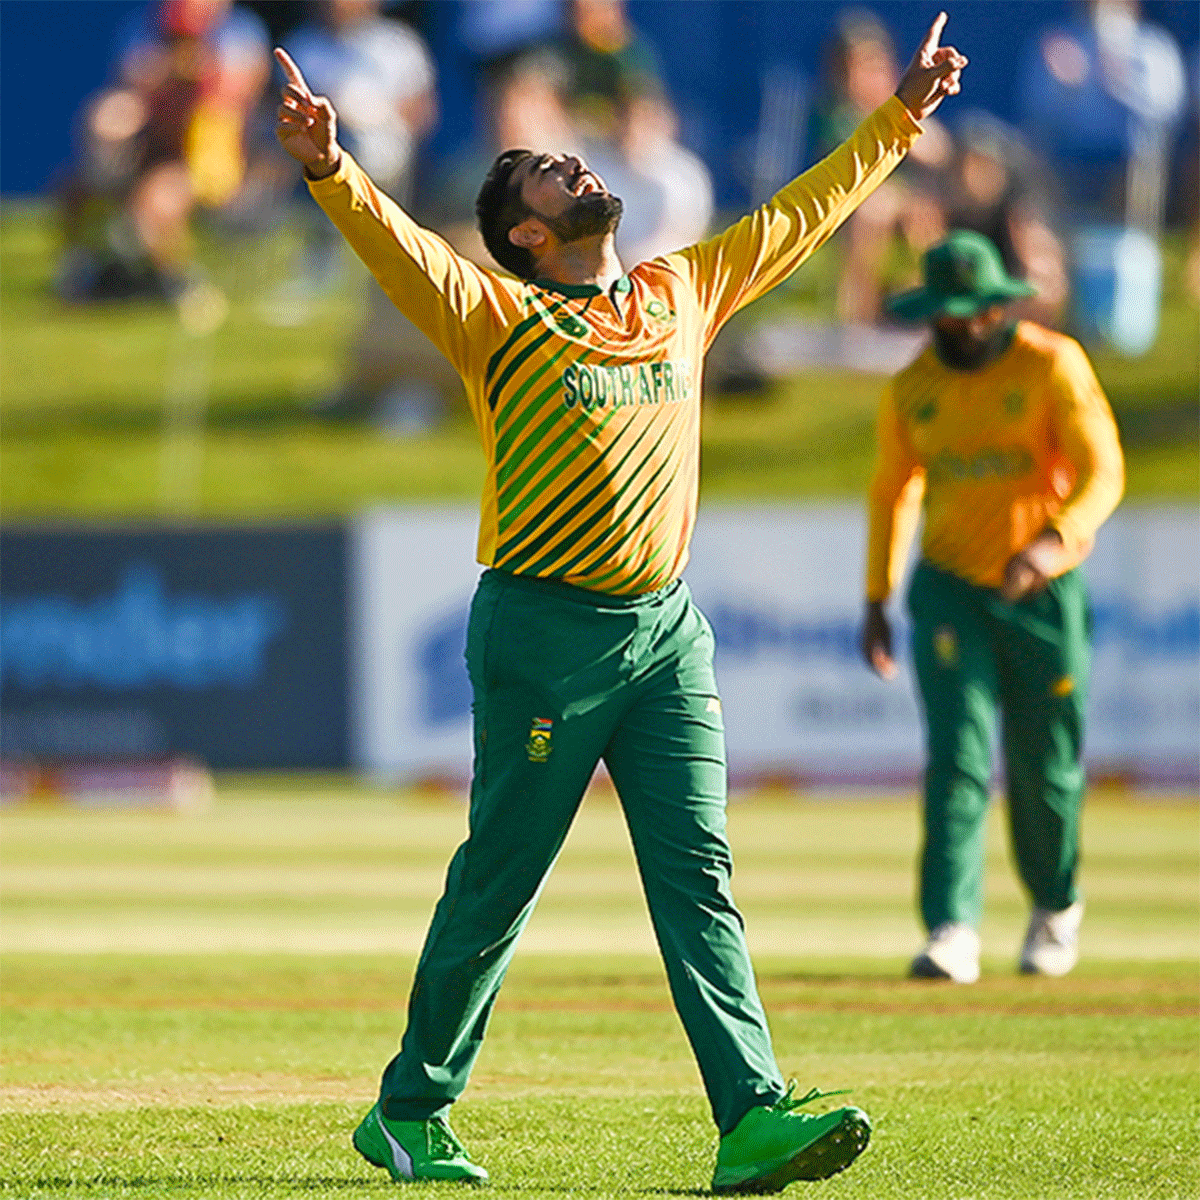 Tabraiz Shamsi, who is the number one ranked bowler in the format, bamboozled the hosts as he turned the ball both ways and collected figures of 4-27.